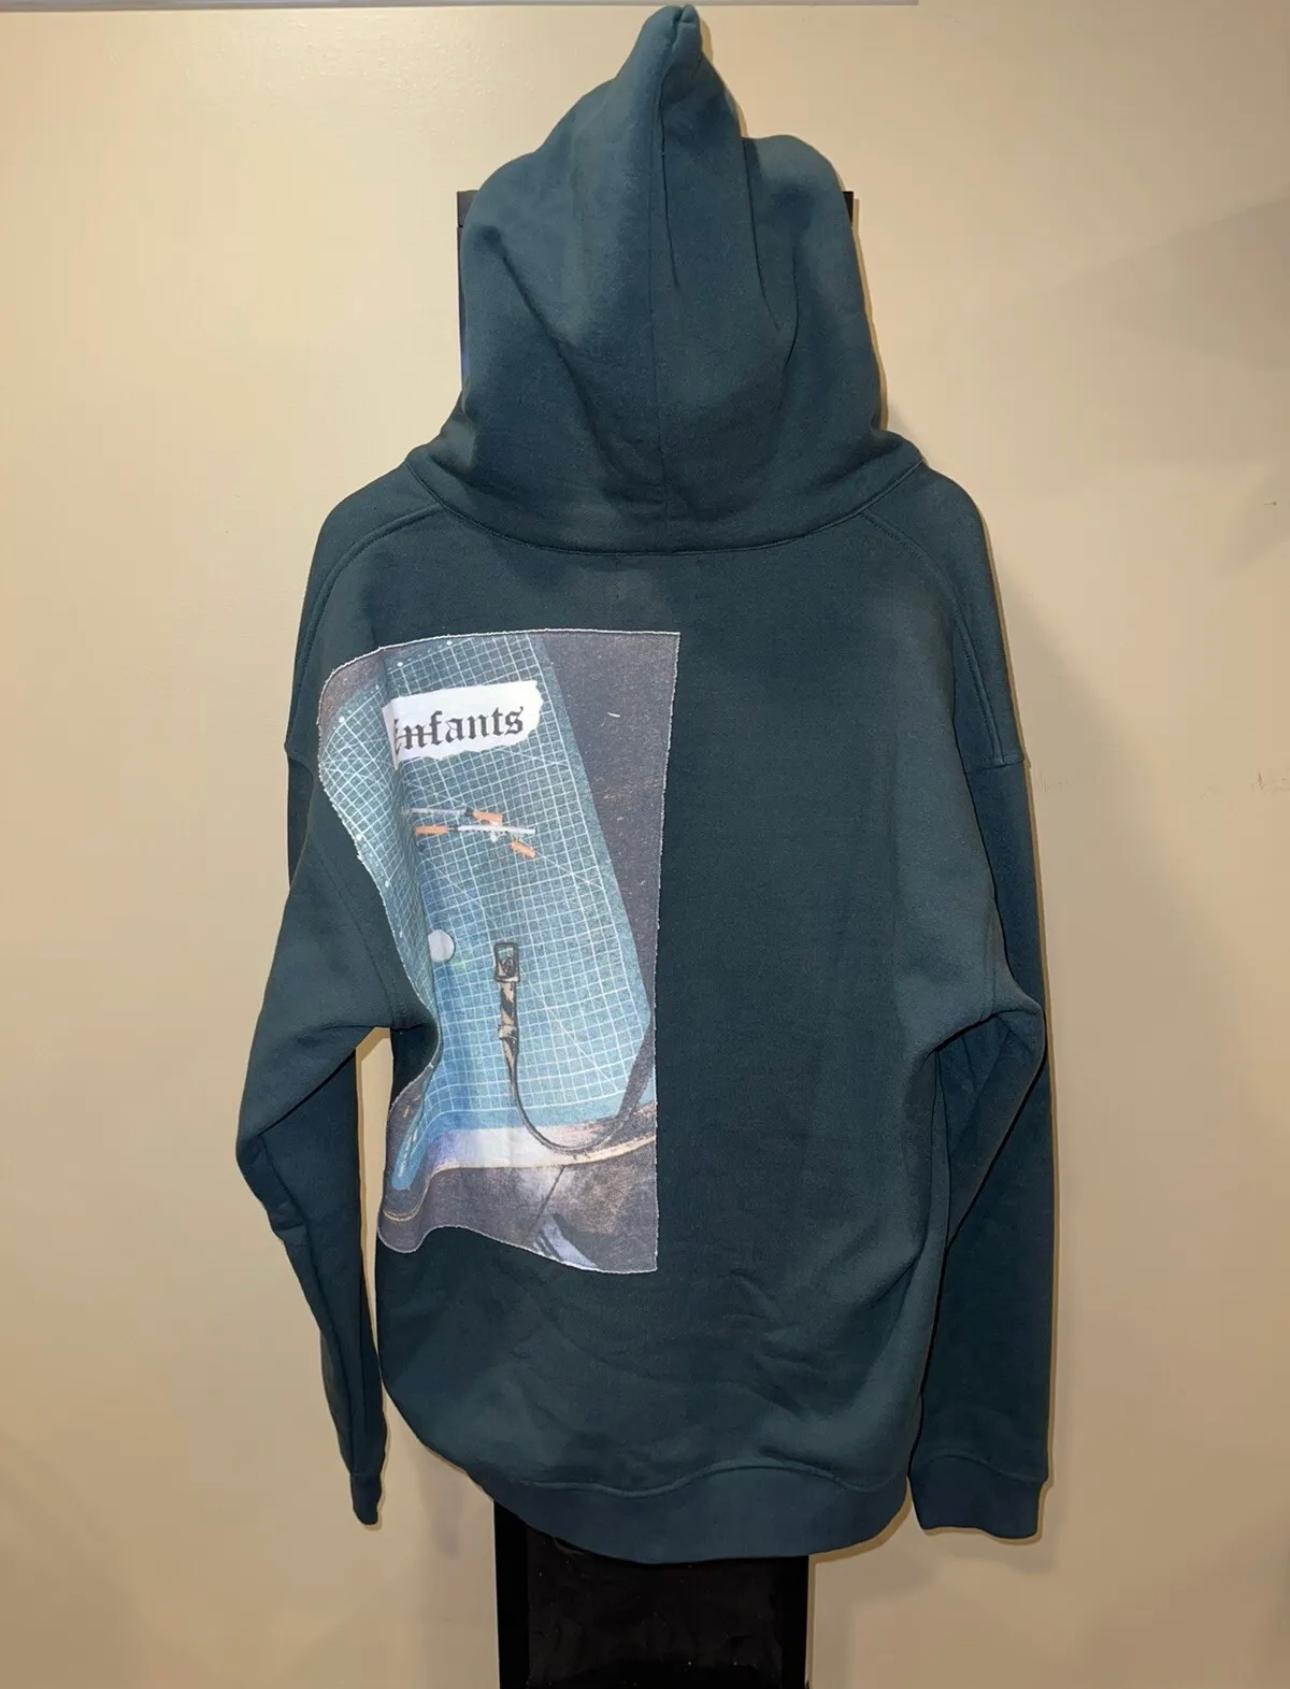 Enfants Riches Deprimes Green Assemblage Heroin Needle Patch Hoodie In Excellent Condition For Sale In Bear, DE